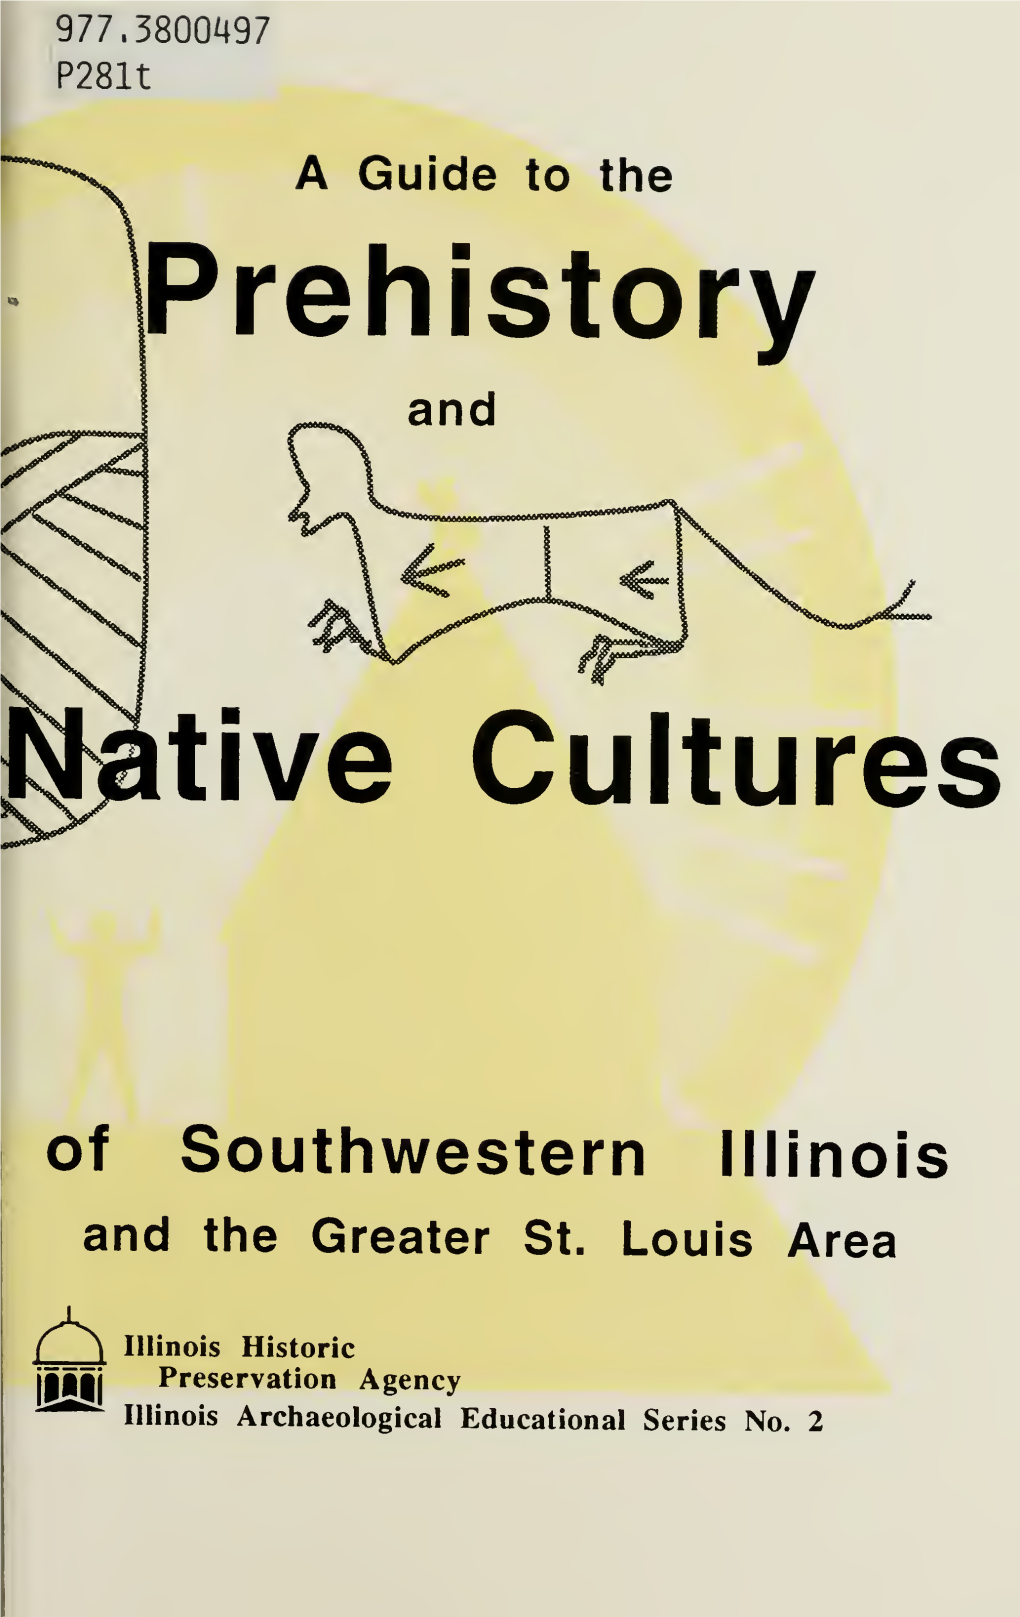 A Tour Guide to the Prehistory and Native Cultures of Southwestern